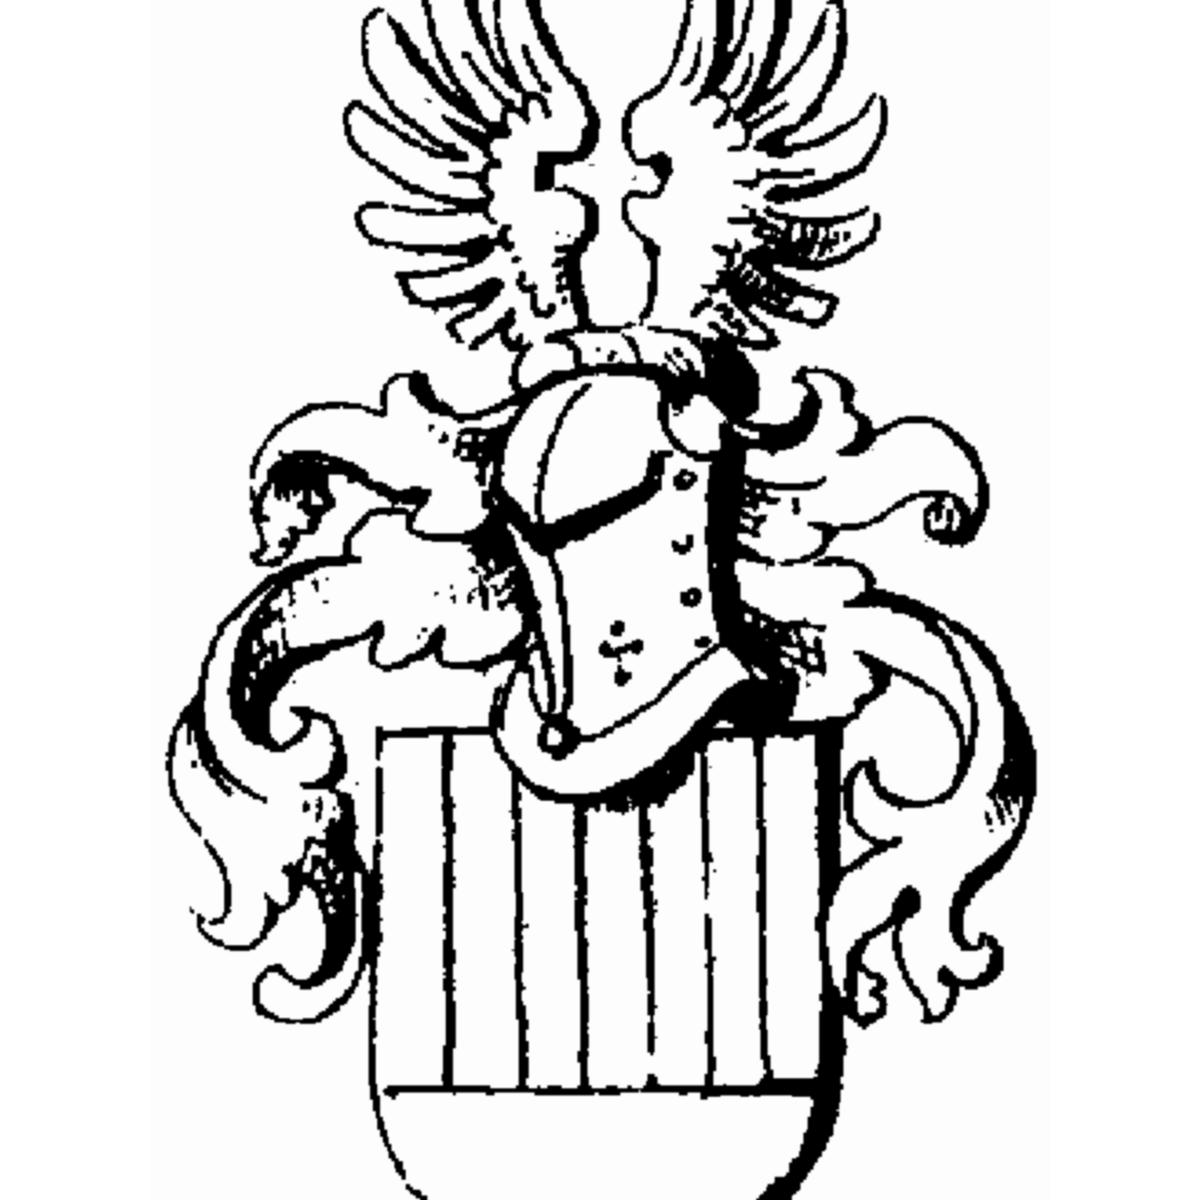 Coat of arms of family Papin